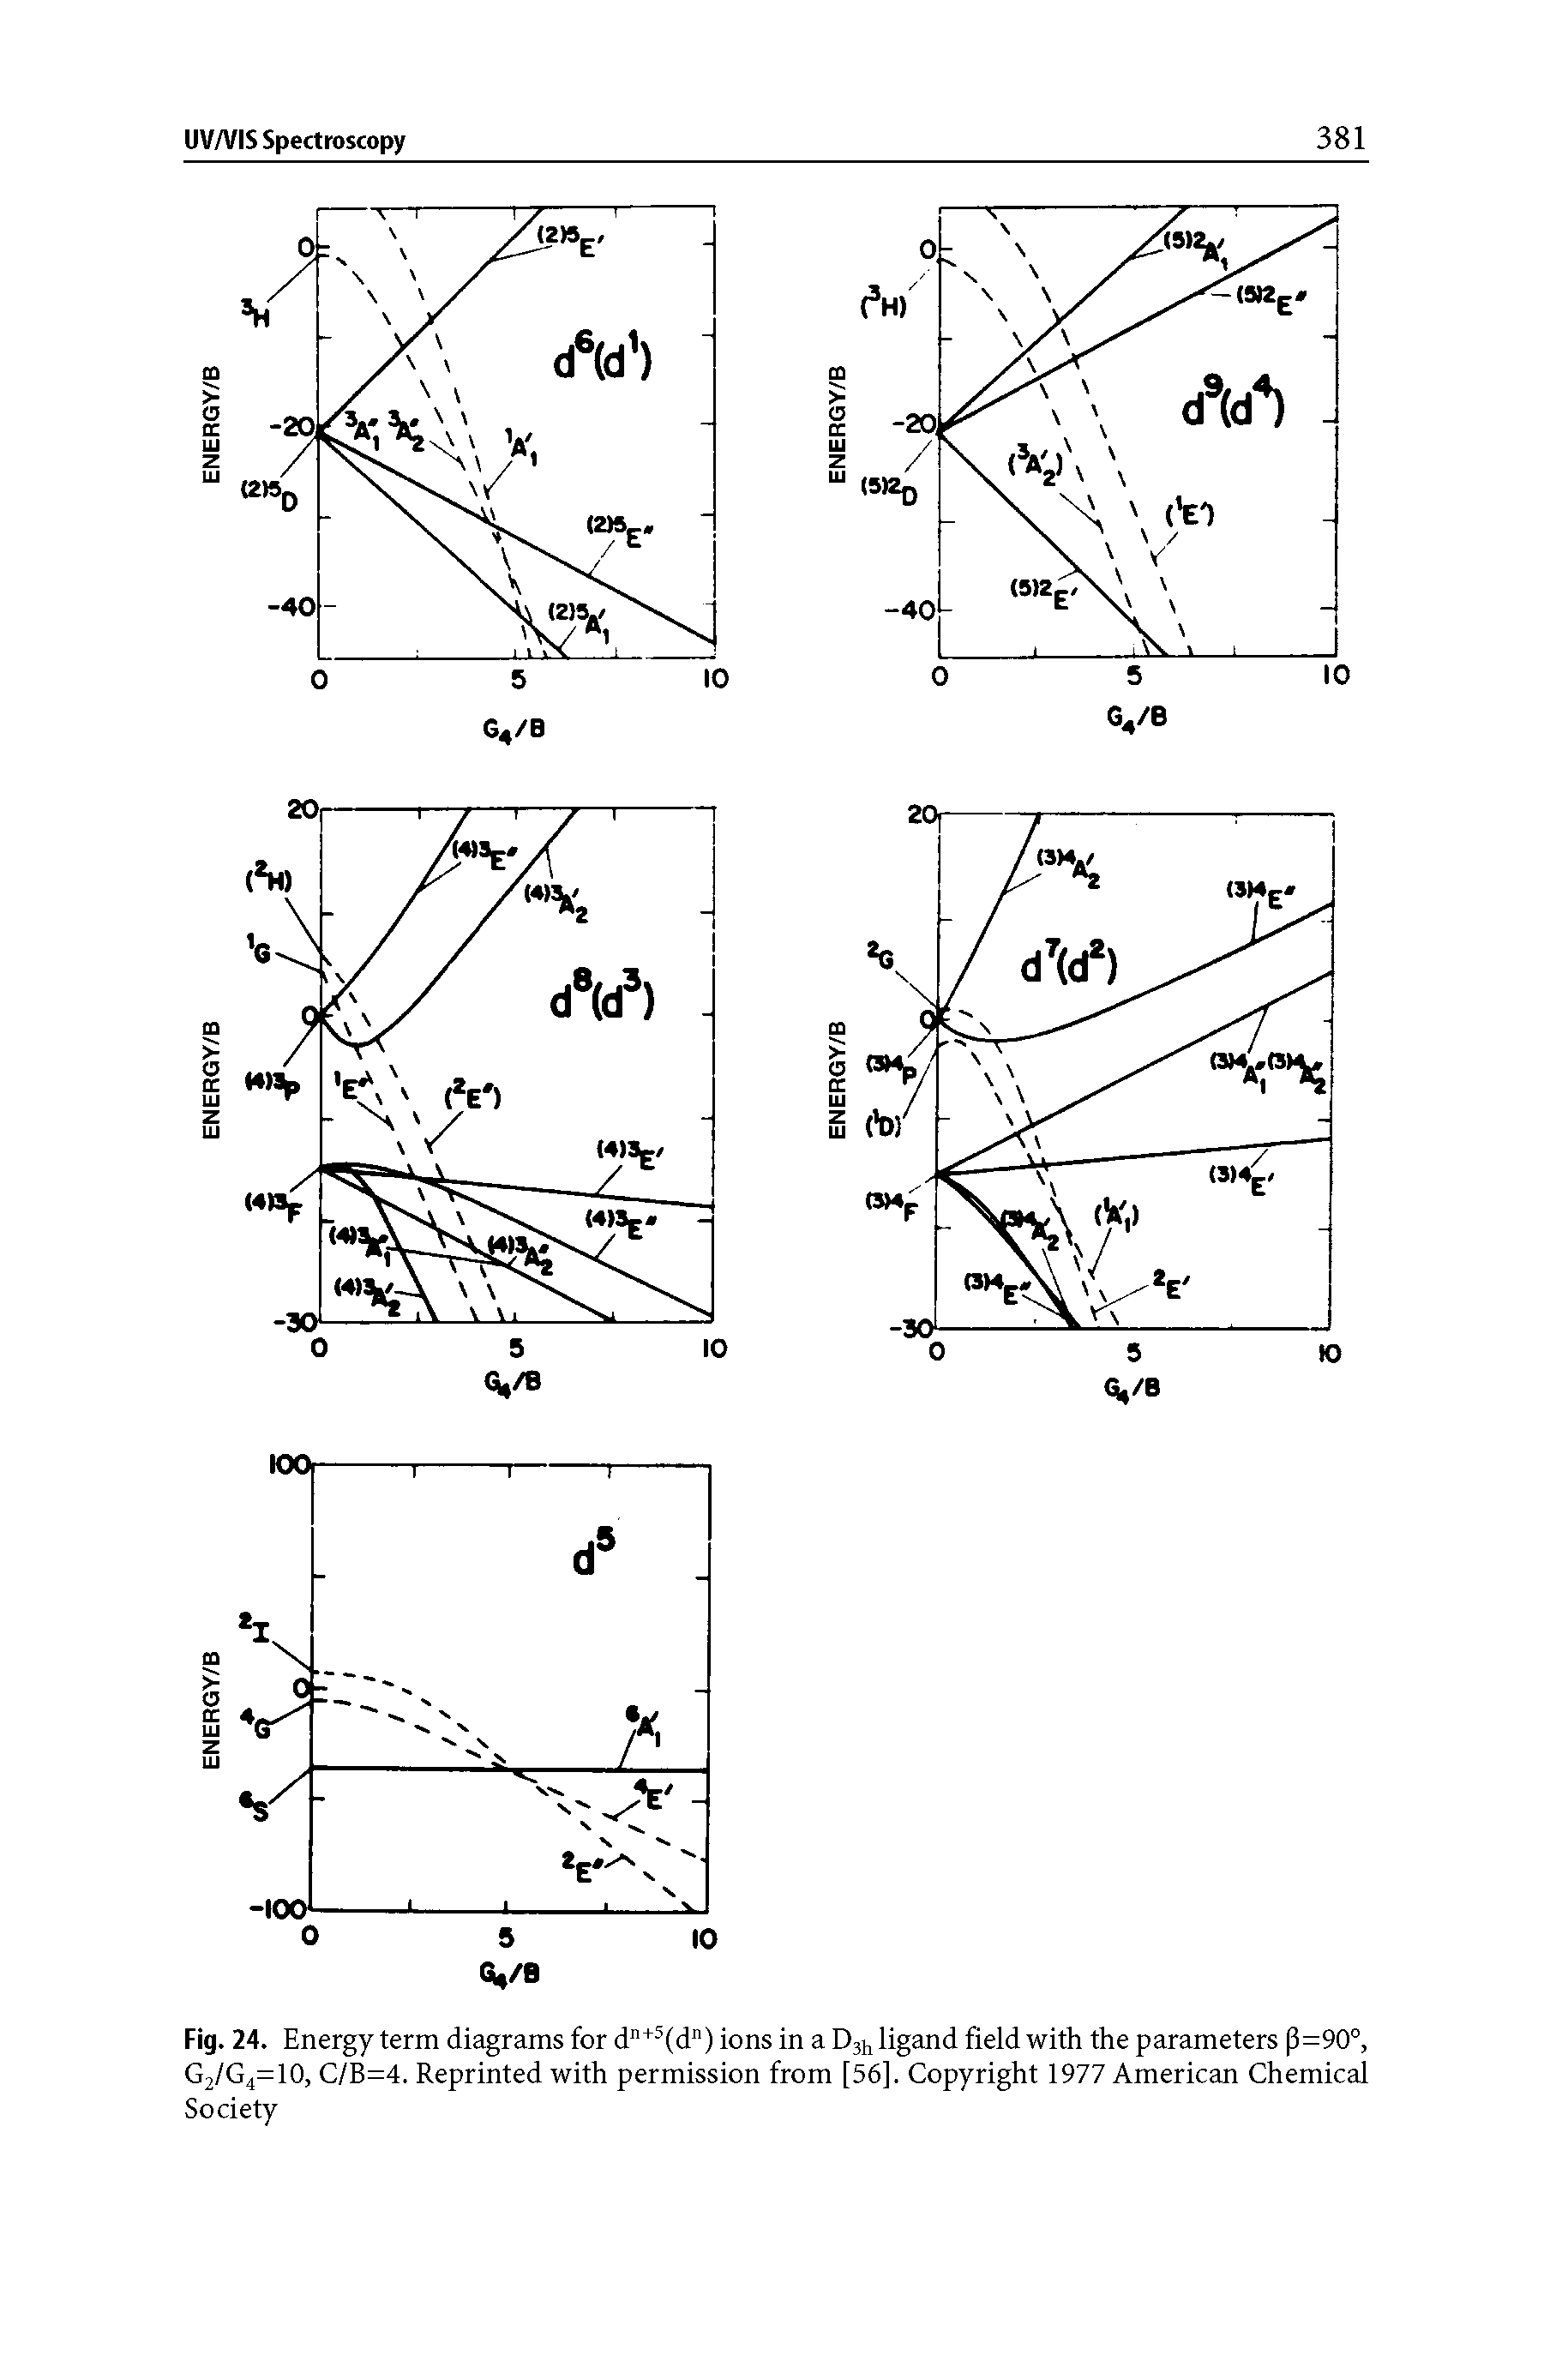 Fig. 24. Energy term diagrams for d + (d ) ions in a Djij ligand field with the parameters p=90°, 02/64=10, C/B=4. Reprinted with permission from [56], Copyright 1977 American Chemical Society...